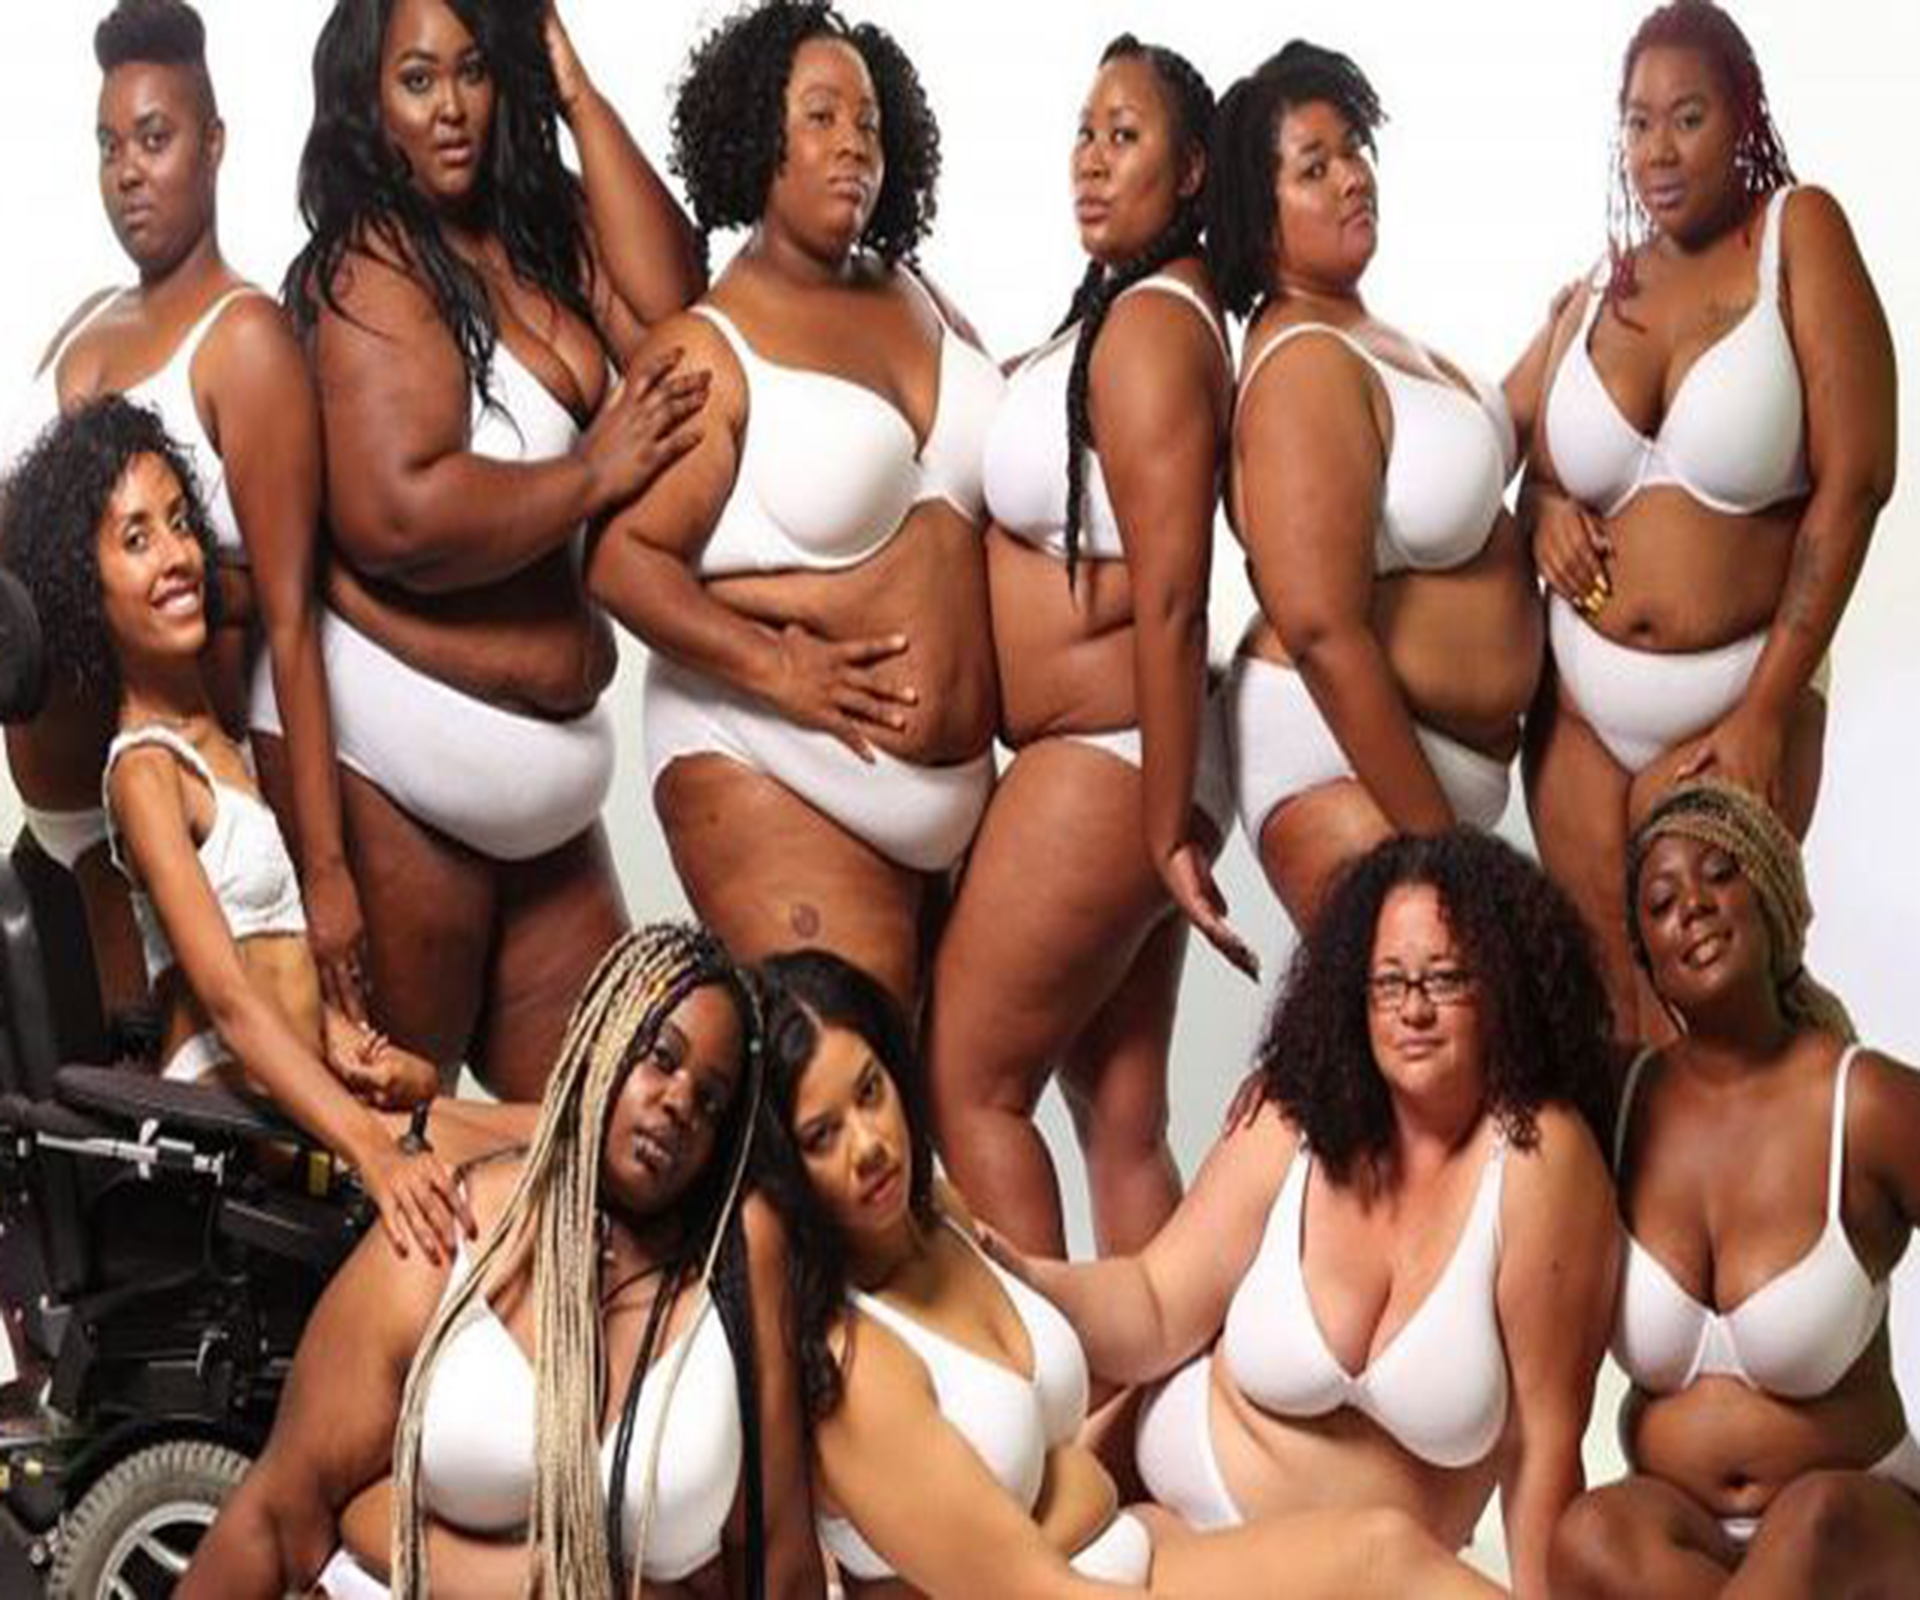 Because every single body is beautiful